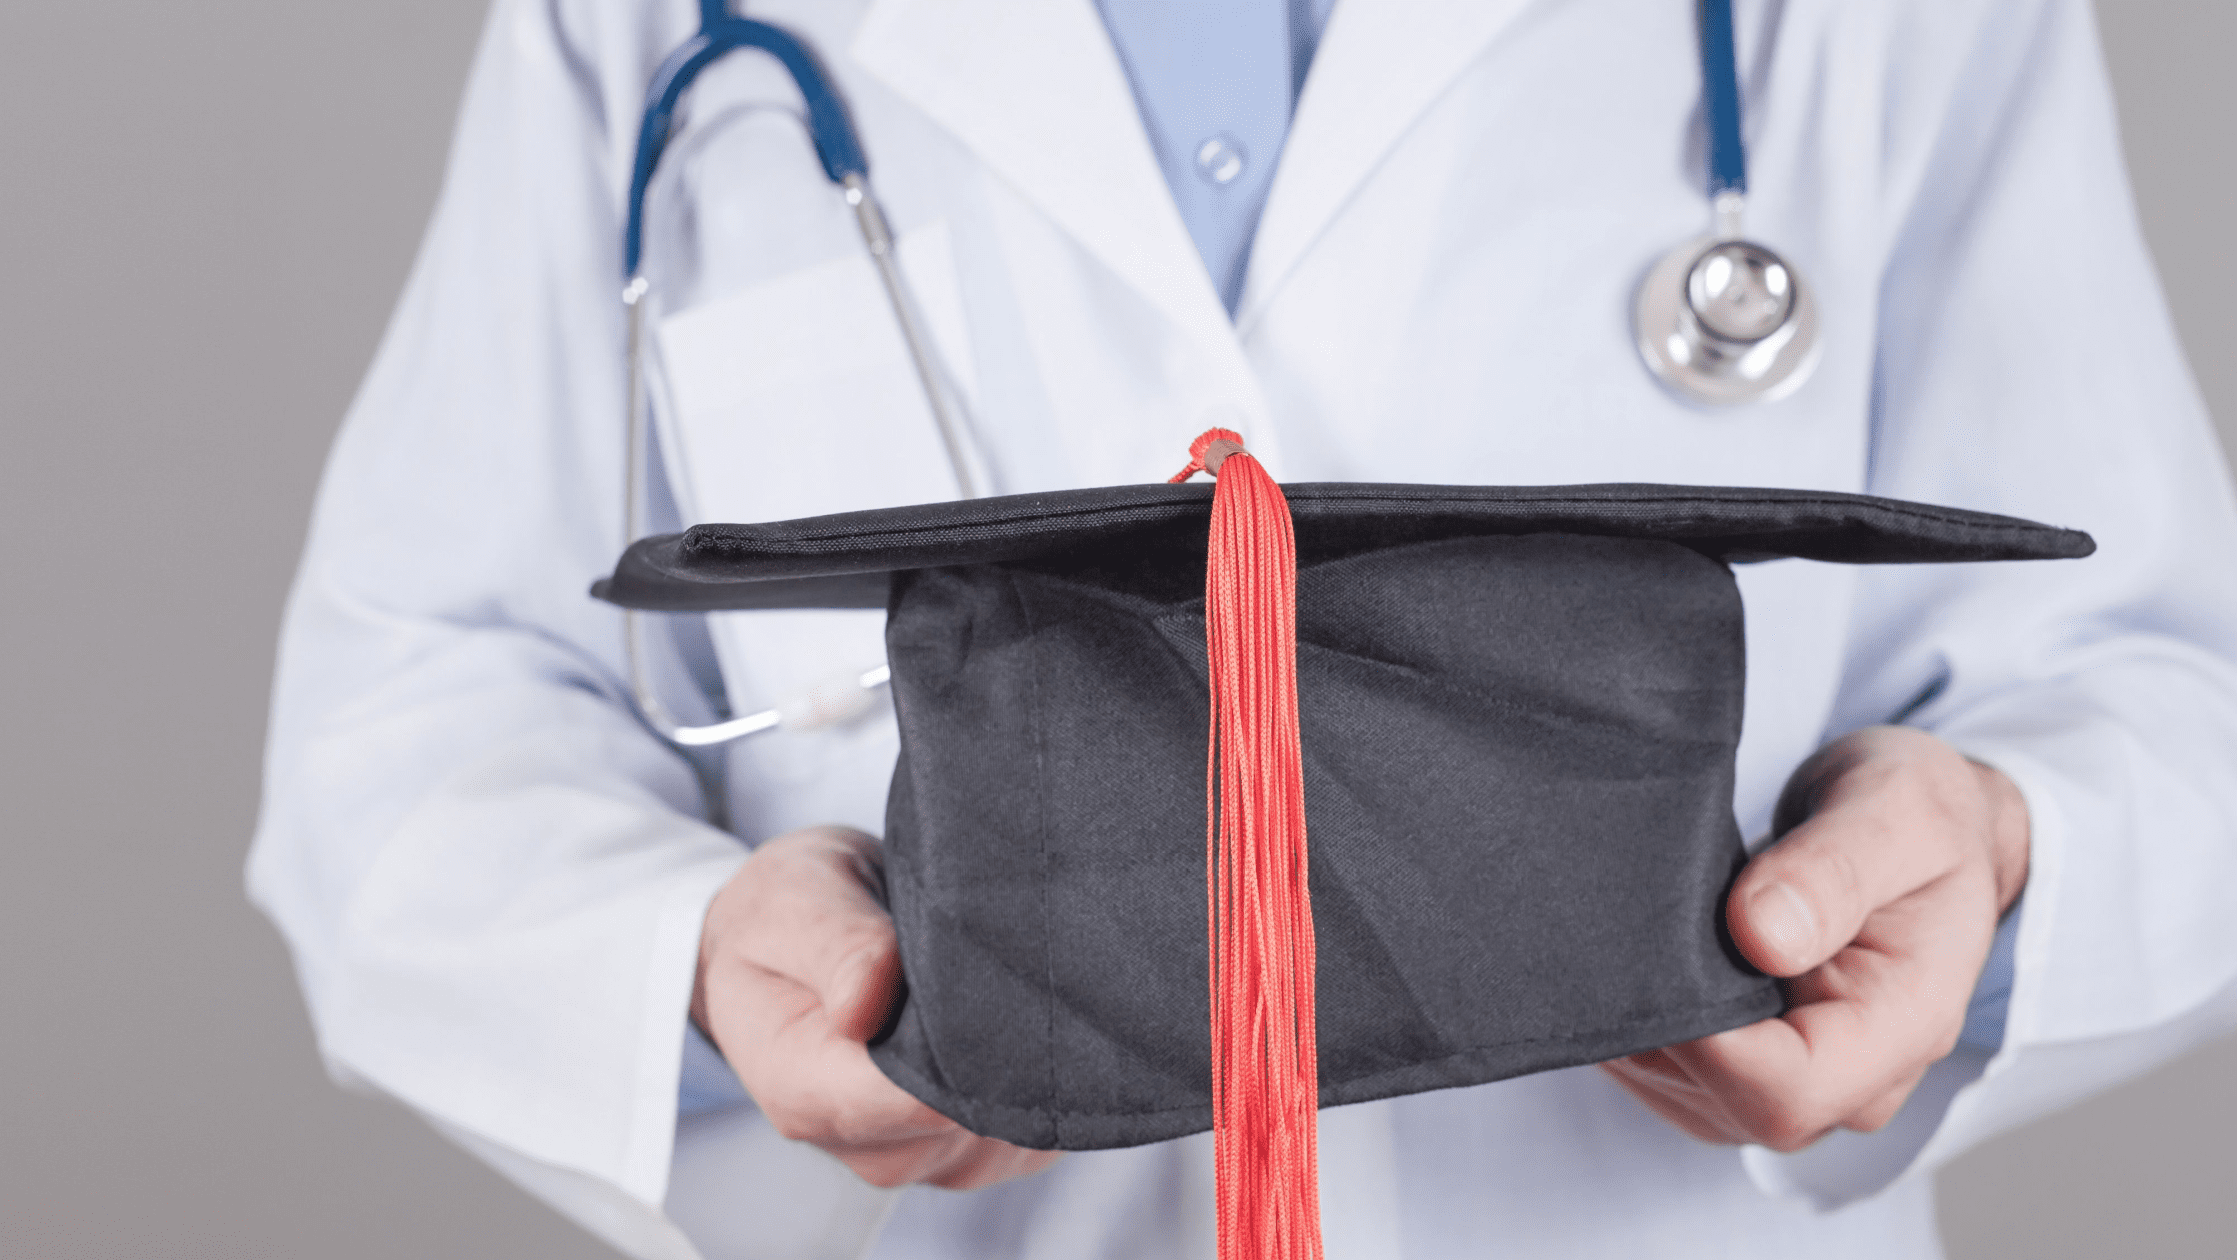 A doctor wearing a lab coat holding a graduation cap after having completed his USMLE Step 3 exam.